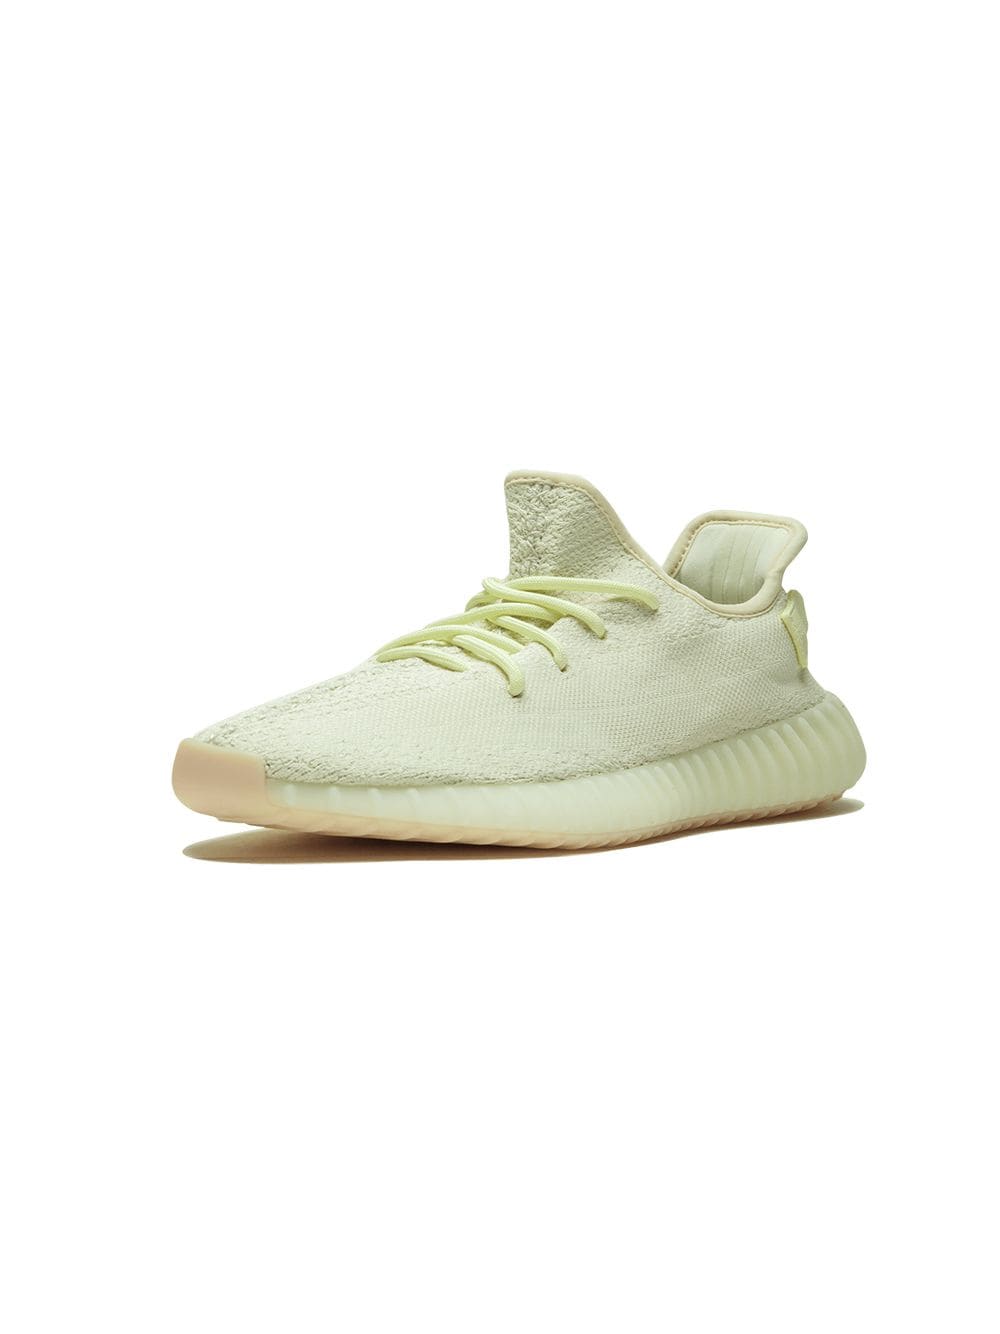 Giày Adidas Yeezy 350 V2 Butter